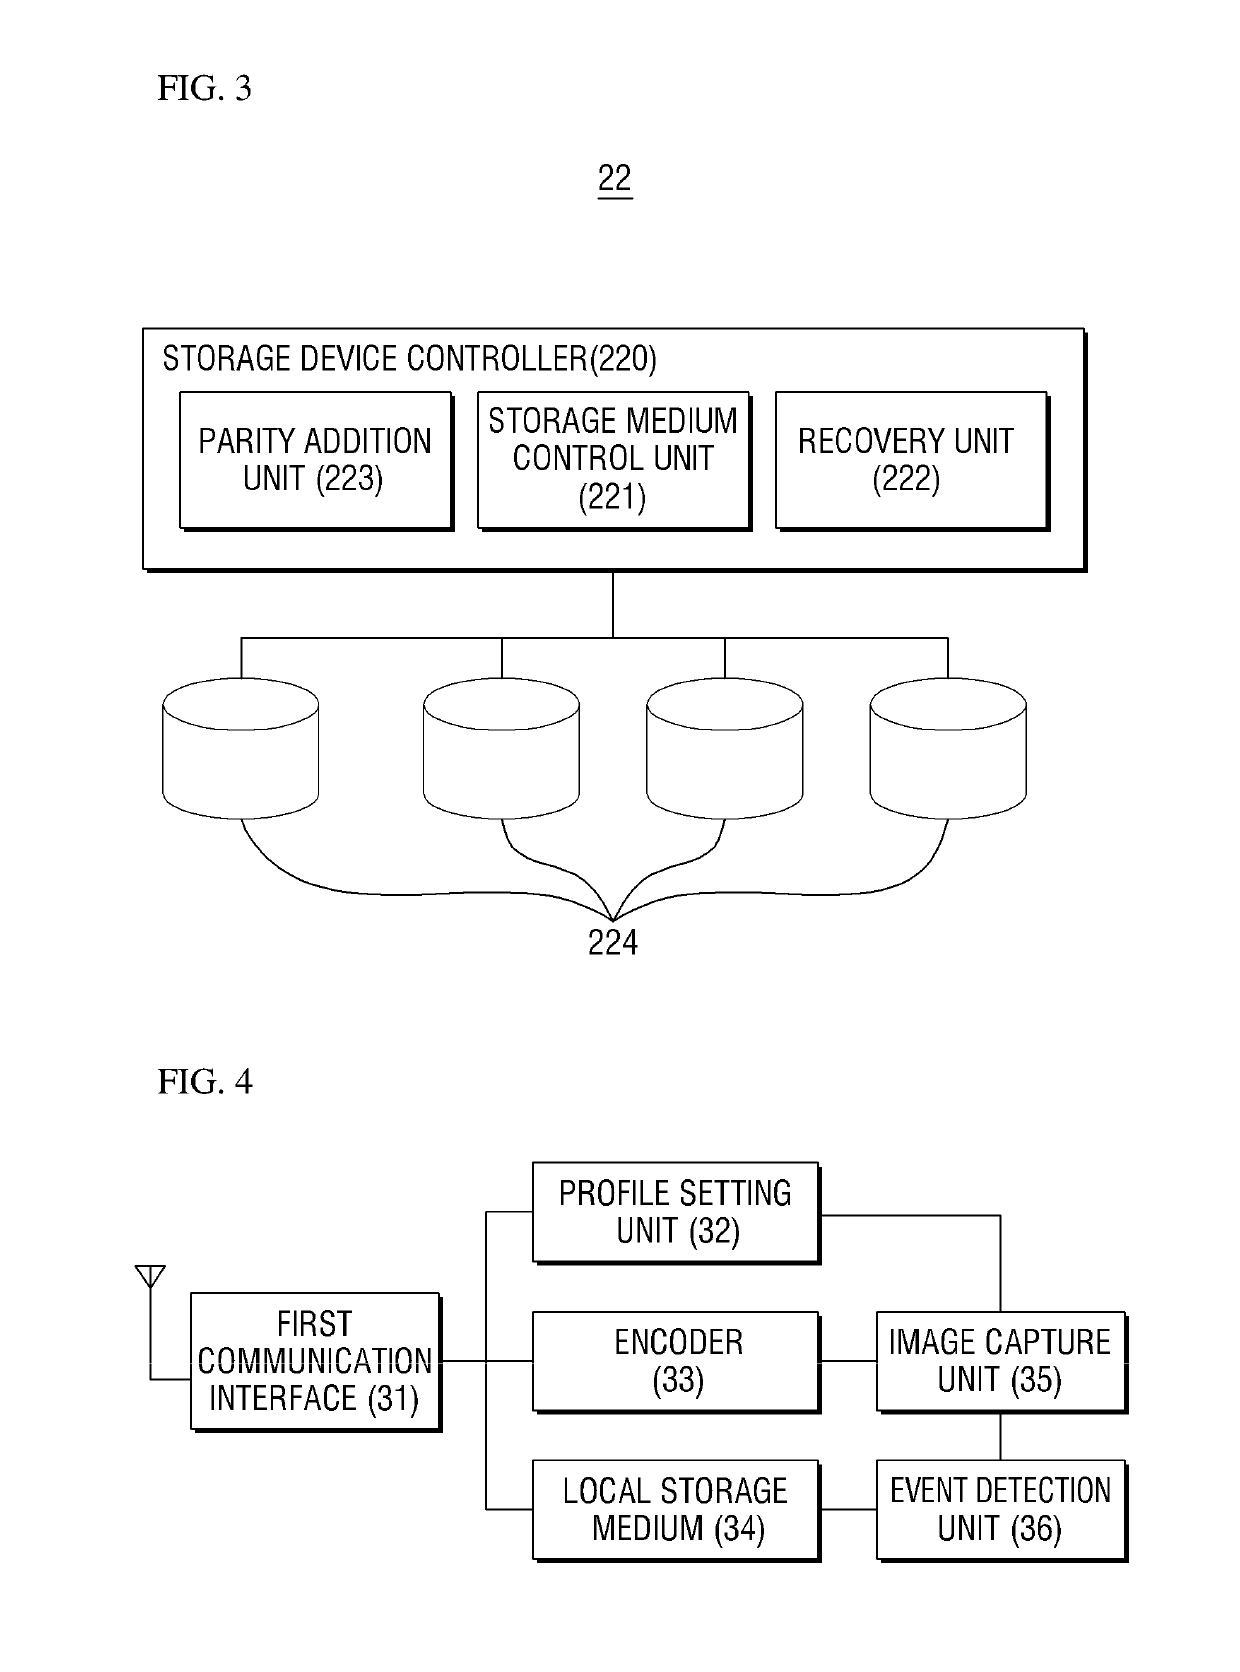 Monitoring camera system and method capable of recording images during storage device recovery